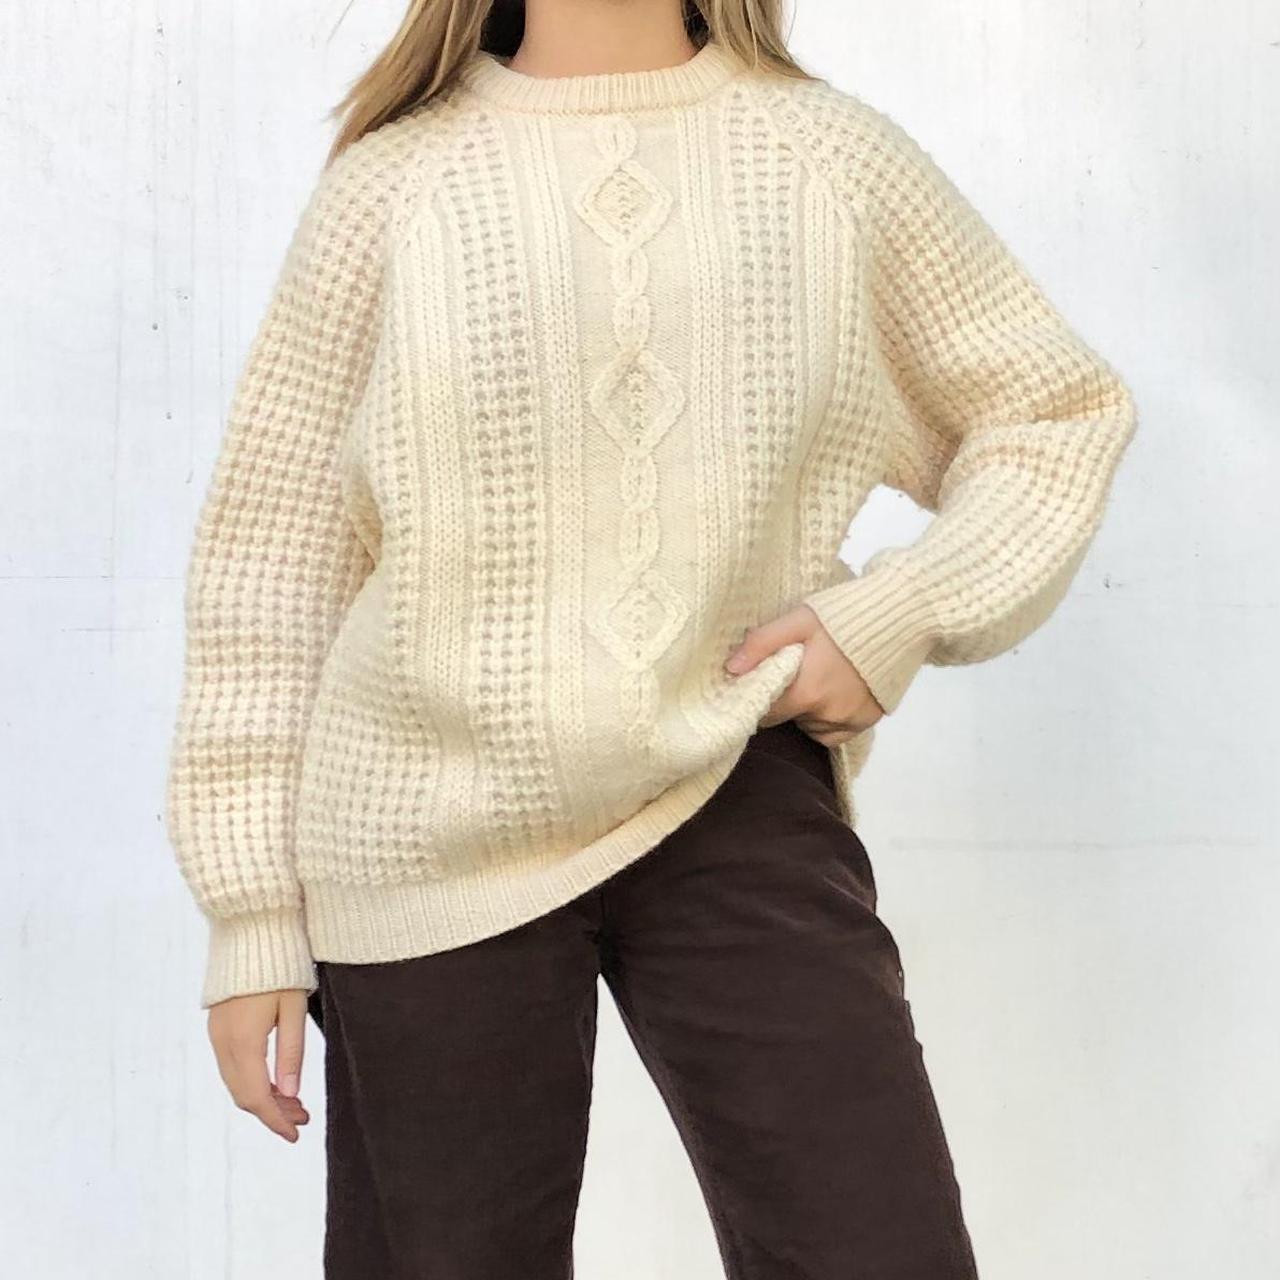 Product Image 1 - Vintage wool sweater! Handloomed in